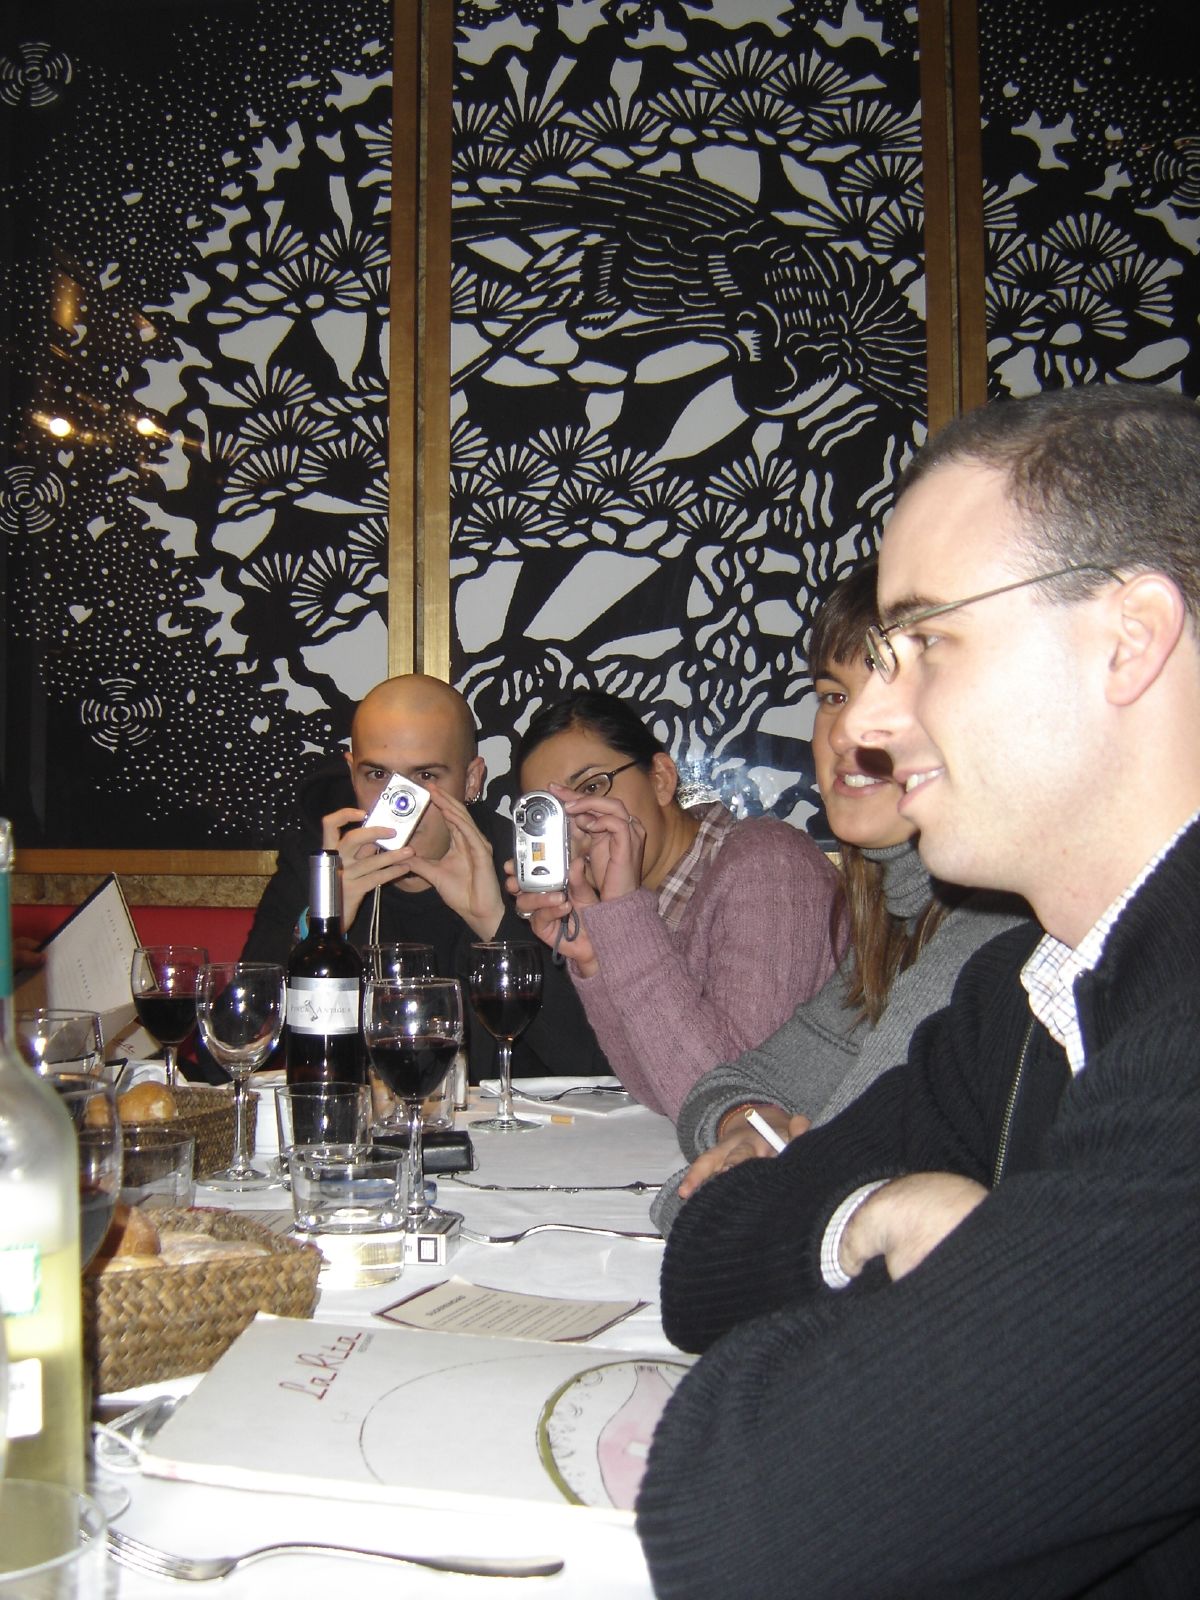 four people at table, one drinking a beverage and the other sitting at a restaurant